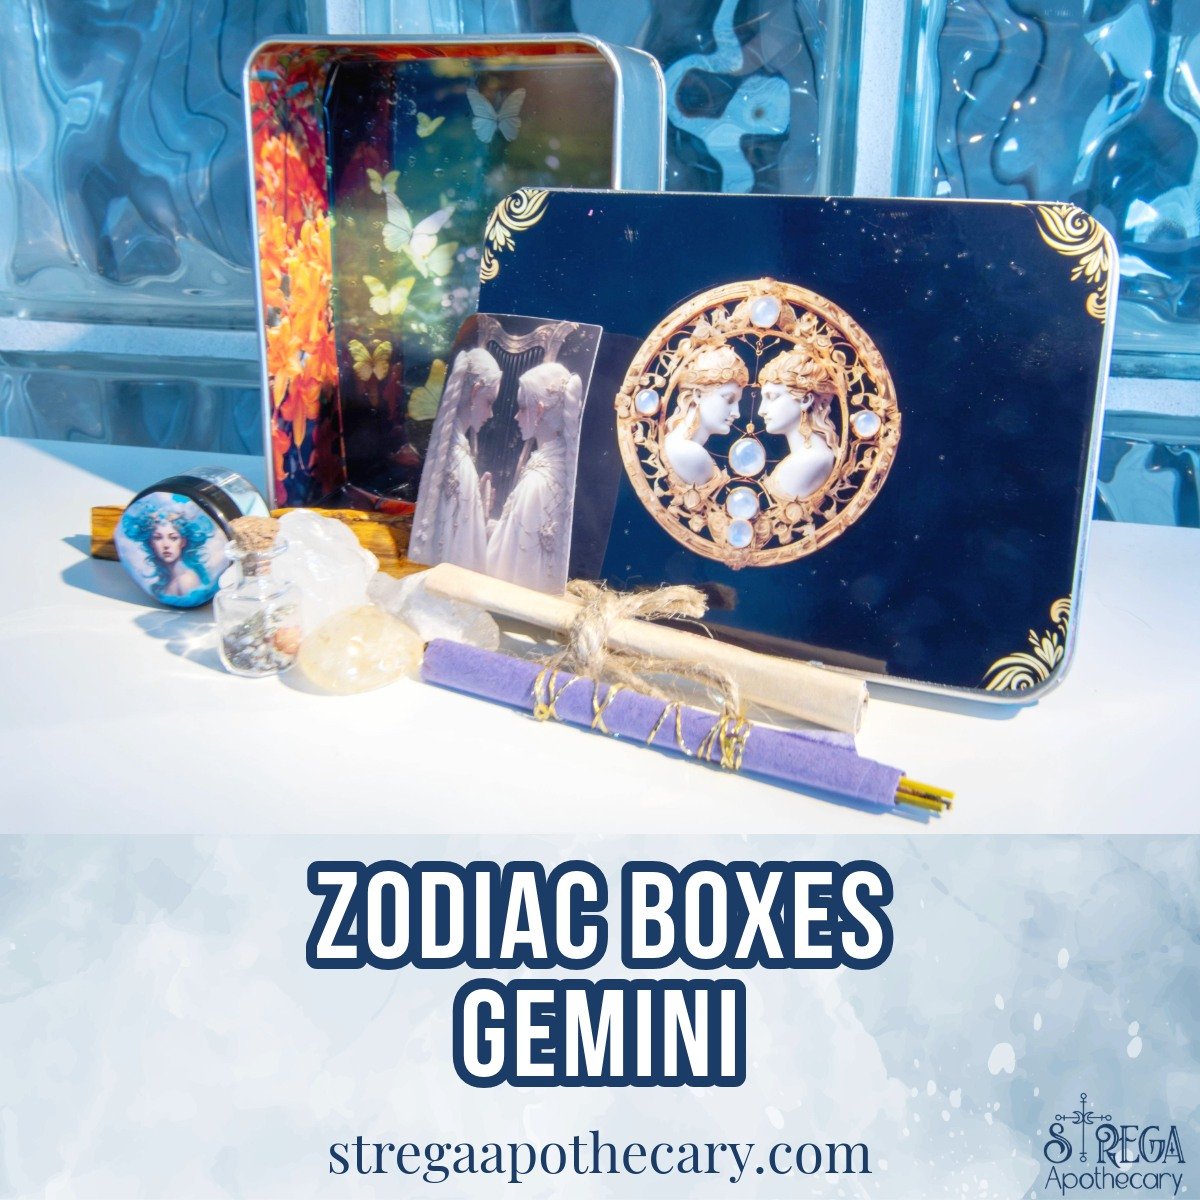 Gemini is represented by the symbol of the Twins, embodying duality, versatility, and curiosity. With our specially curated Gemini Zodiac Box, we invite you to dive deep into the essence of your astrological sign and unlock the treasures that await w